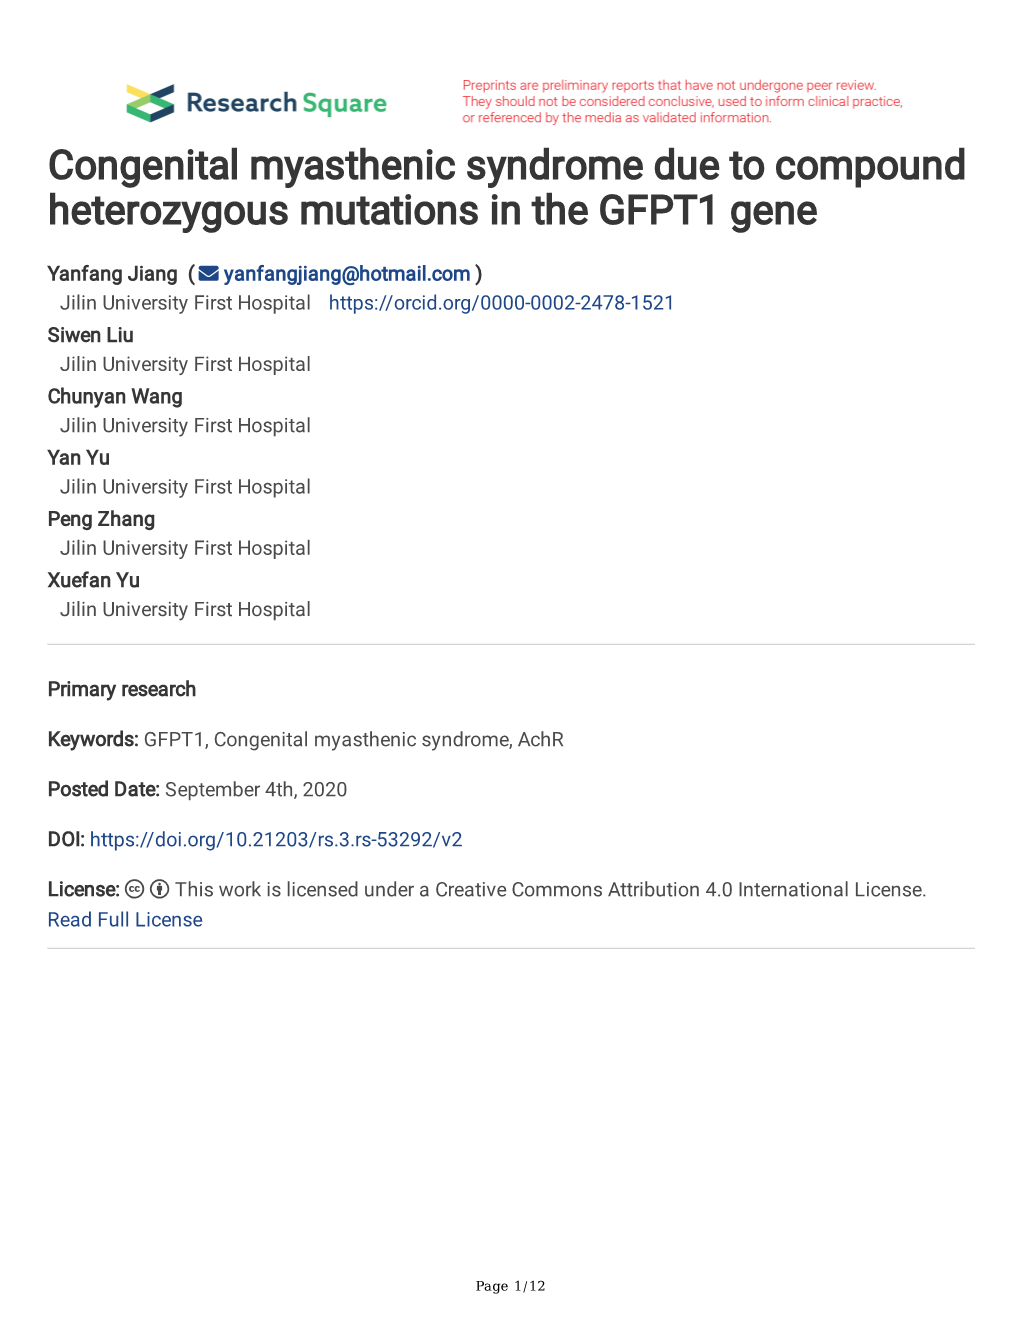 Congenital Myasthenic Syndrome Due to Compound Heterozygous Mutations in the GFPT1 Gene